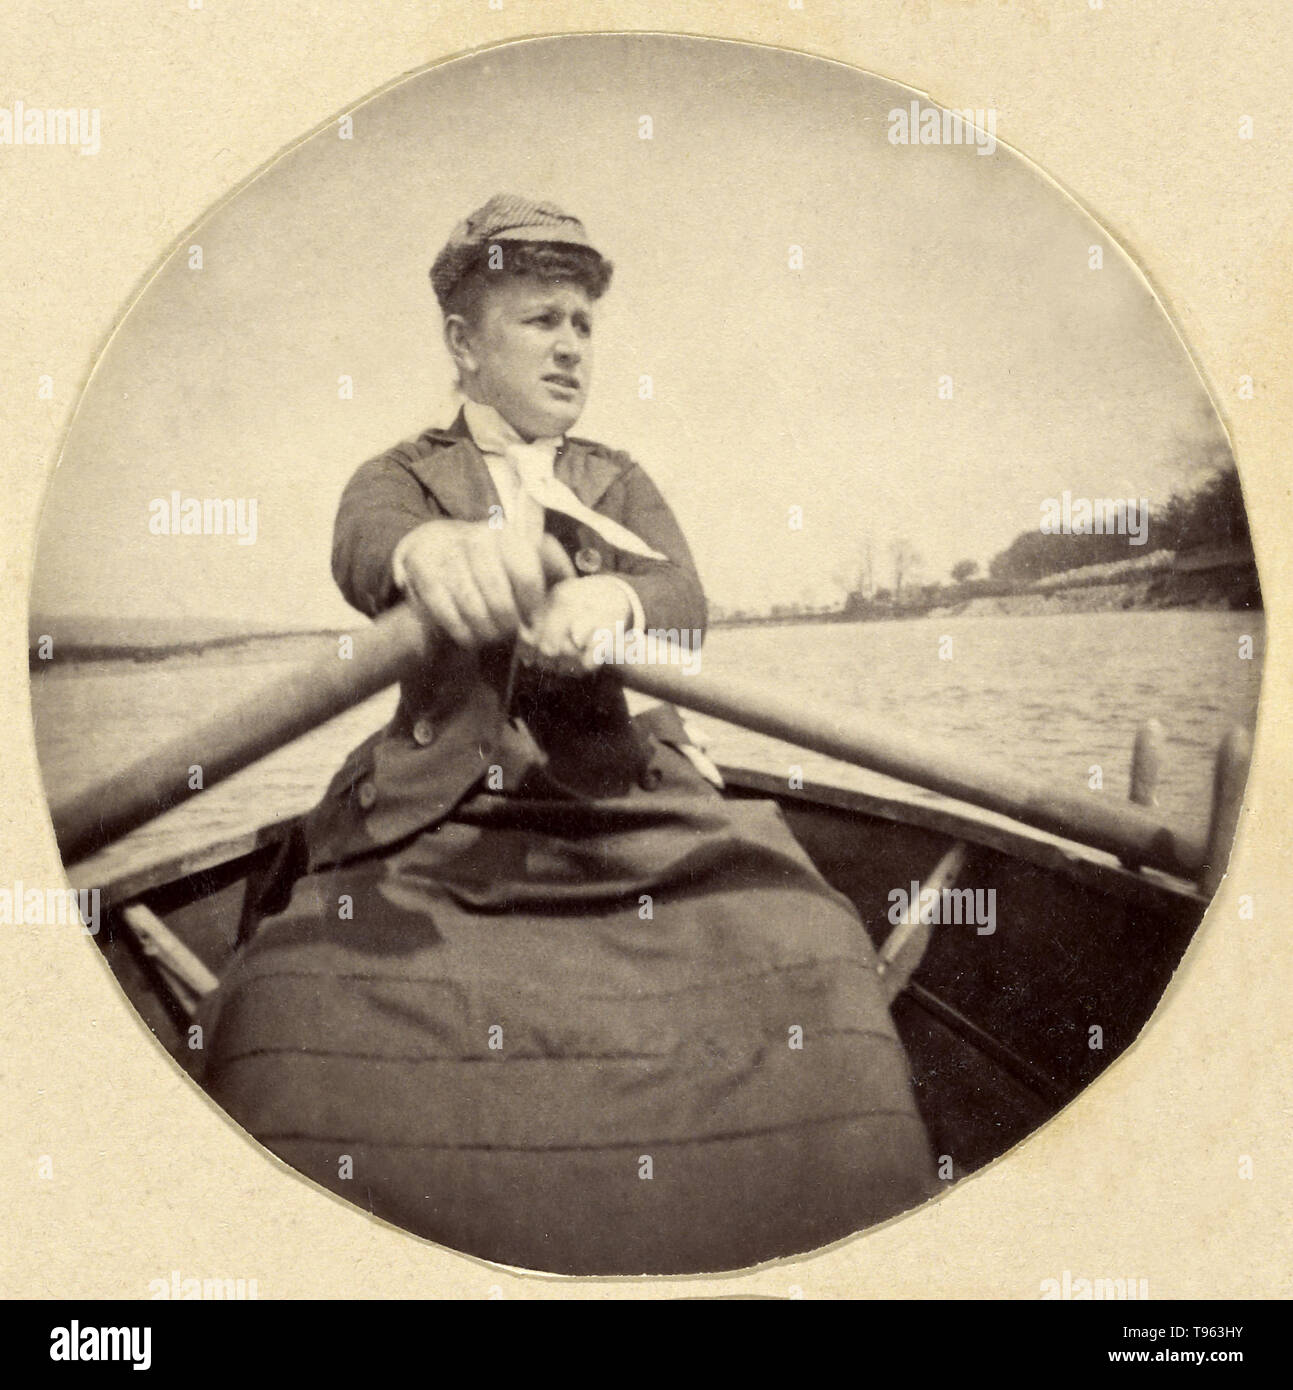 Woman in hat rowing a boat, c. 1888. Albumen silver print. This photograph displays both an unusual perspective and some less common subject matter: an outdoor action shot of a woman physcially exerting herself. In 1888, the Kodak No.1 camera allowed amateurs to shoot scenes that had once been taken only by professional photographers. This broadened the range of subject matter and allowed for a more spontaneous documentation of daily life. Stock Photo